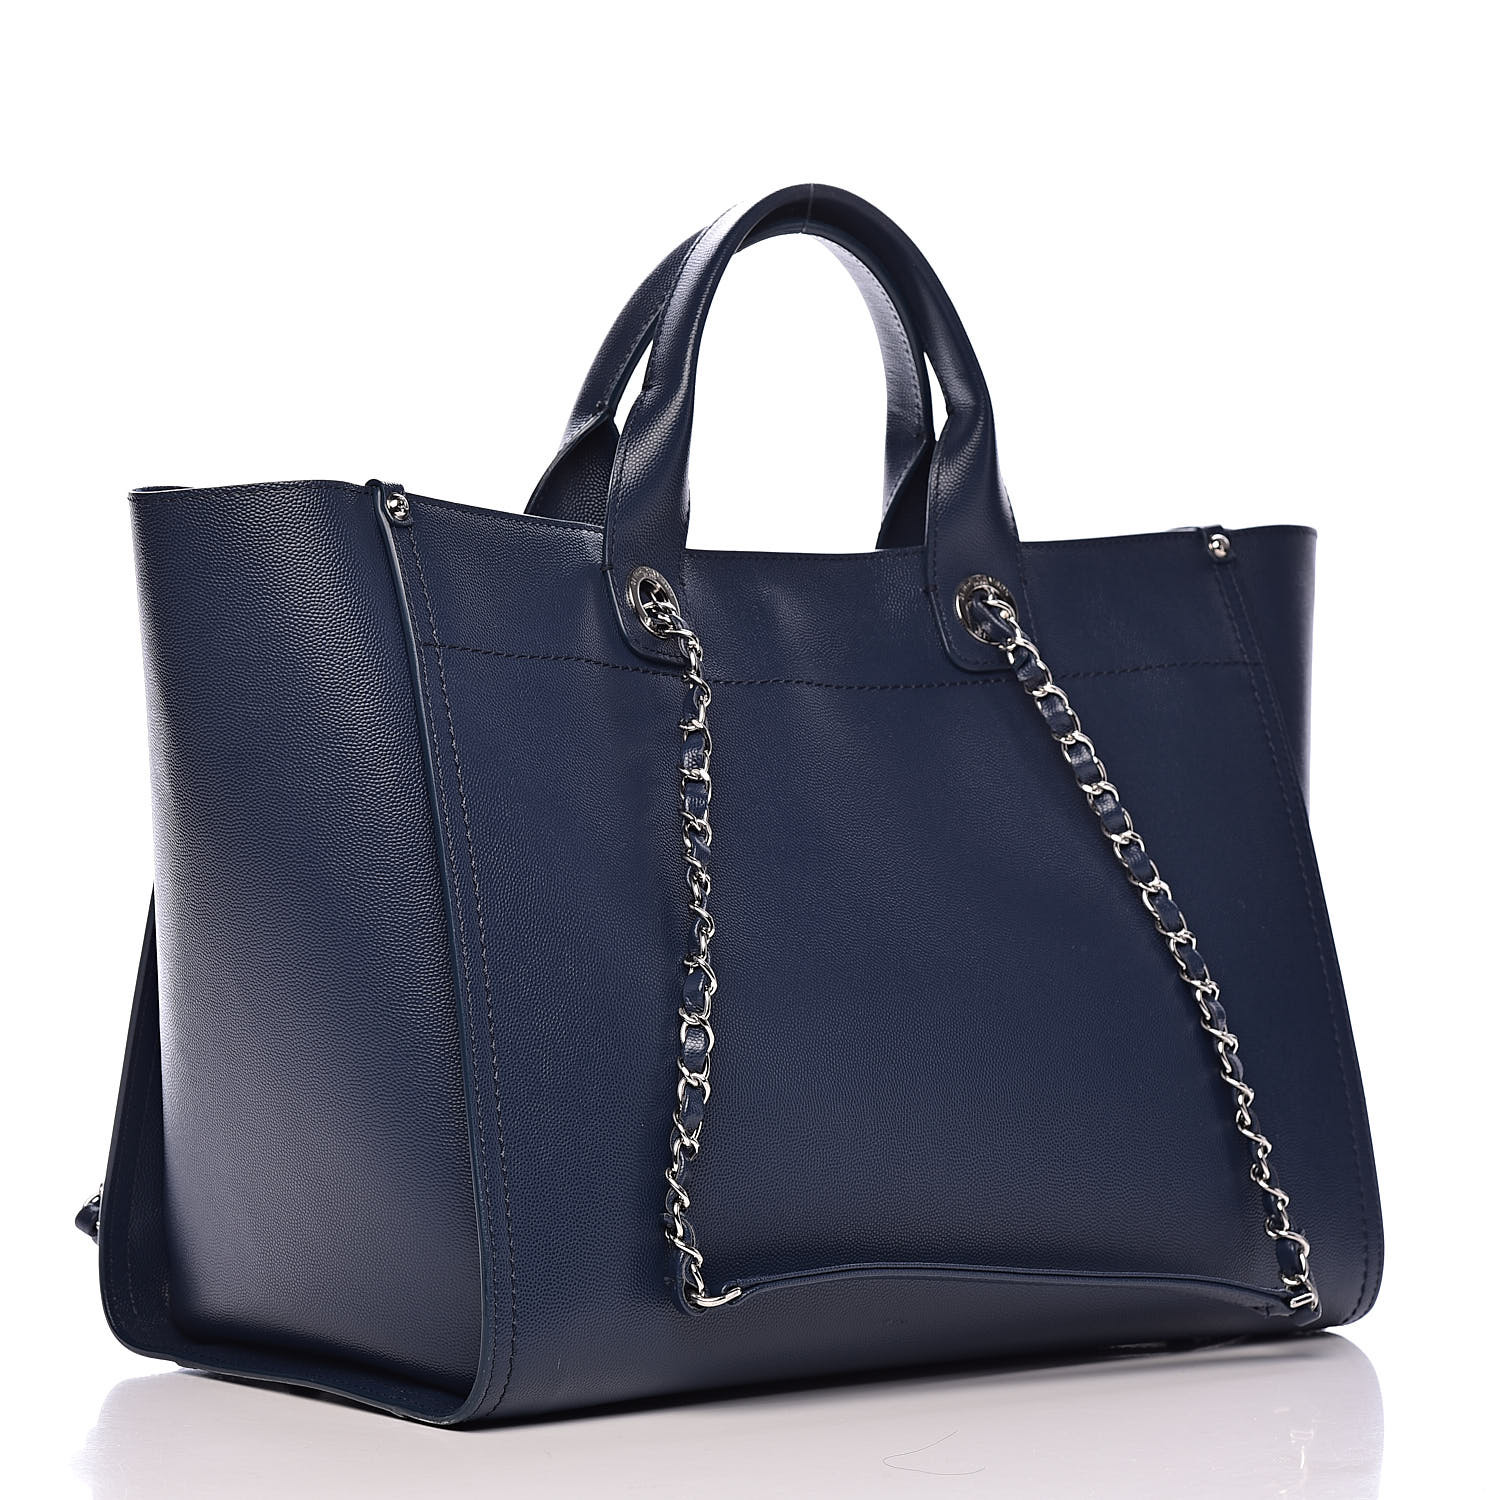 CHANEL Caviar Large Studded Deauville Tote Navy 500469